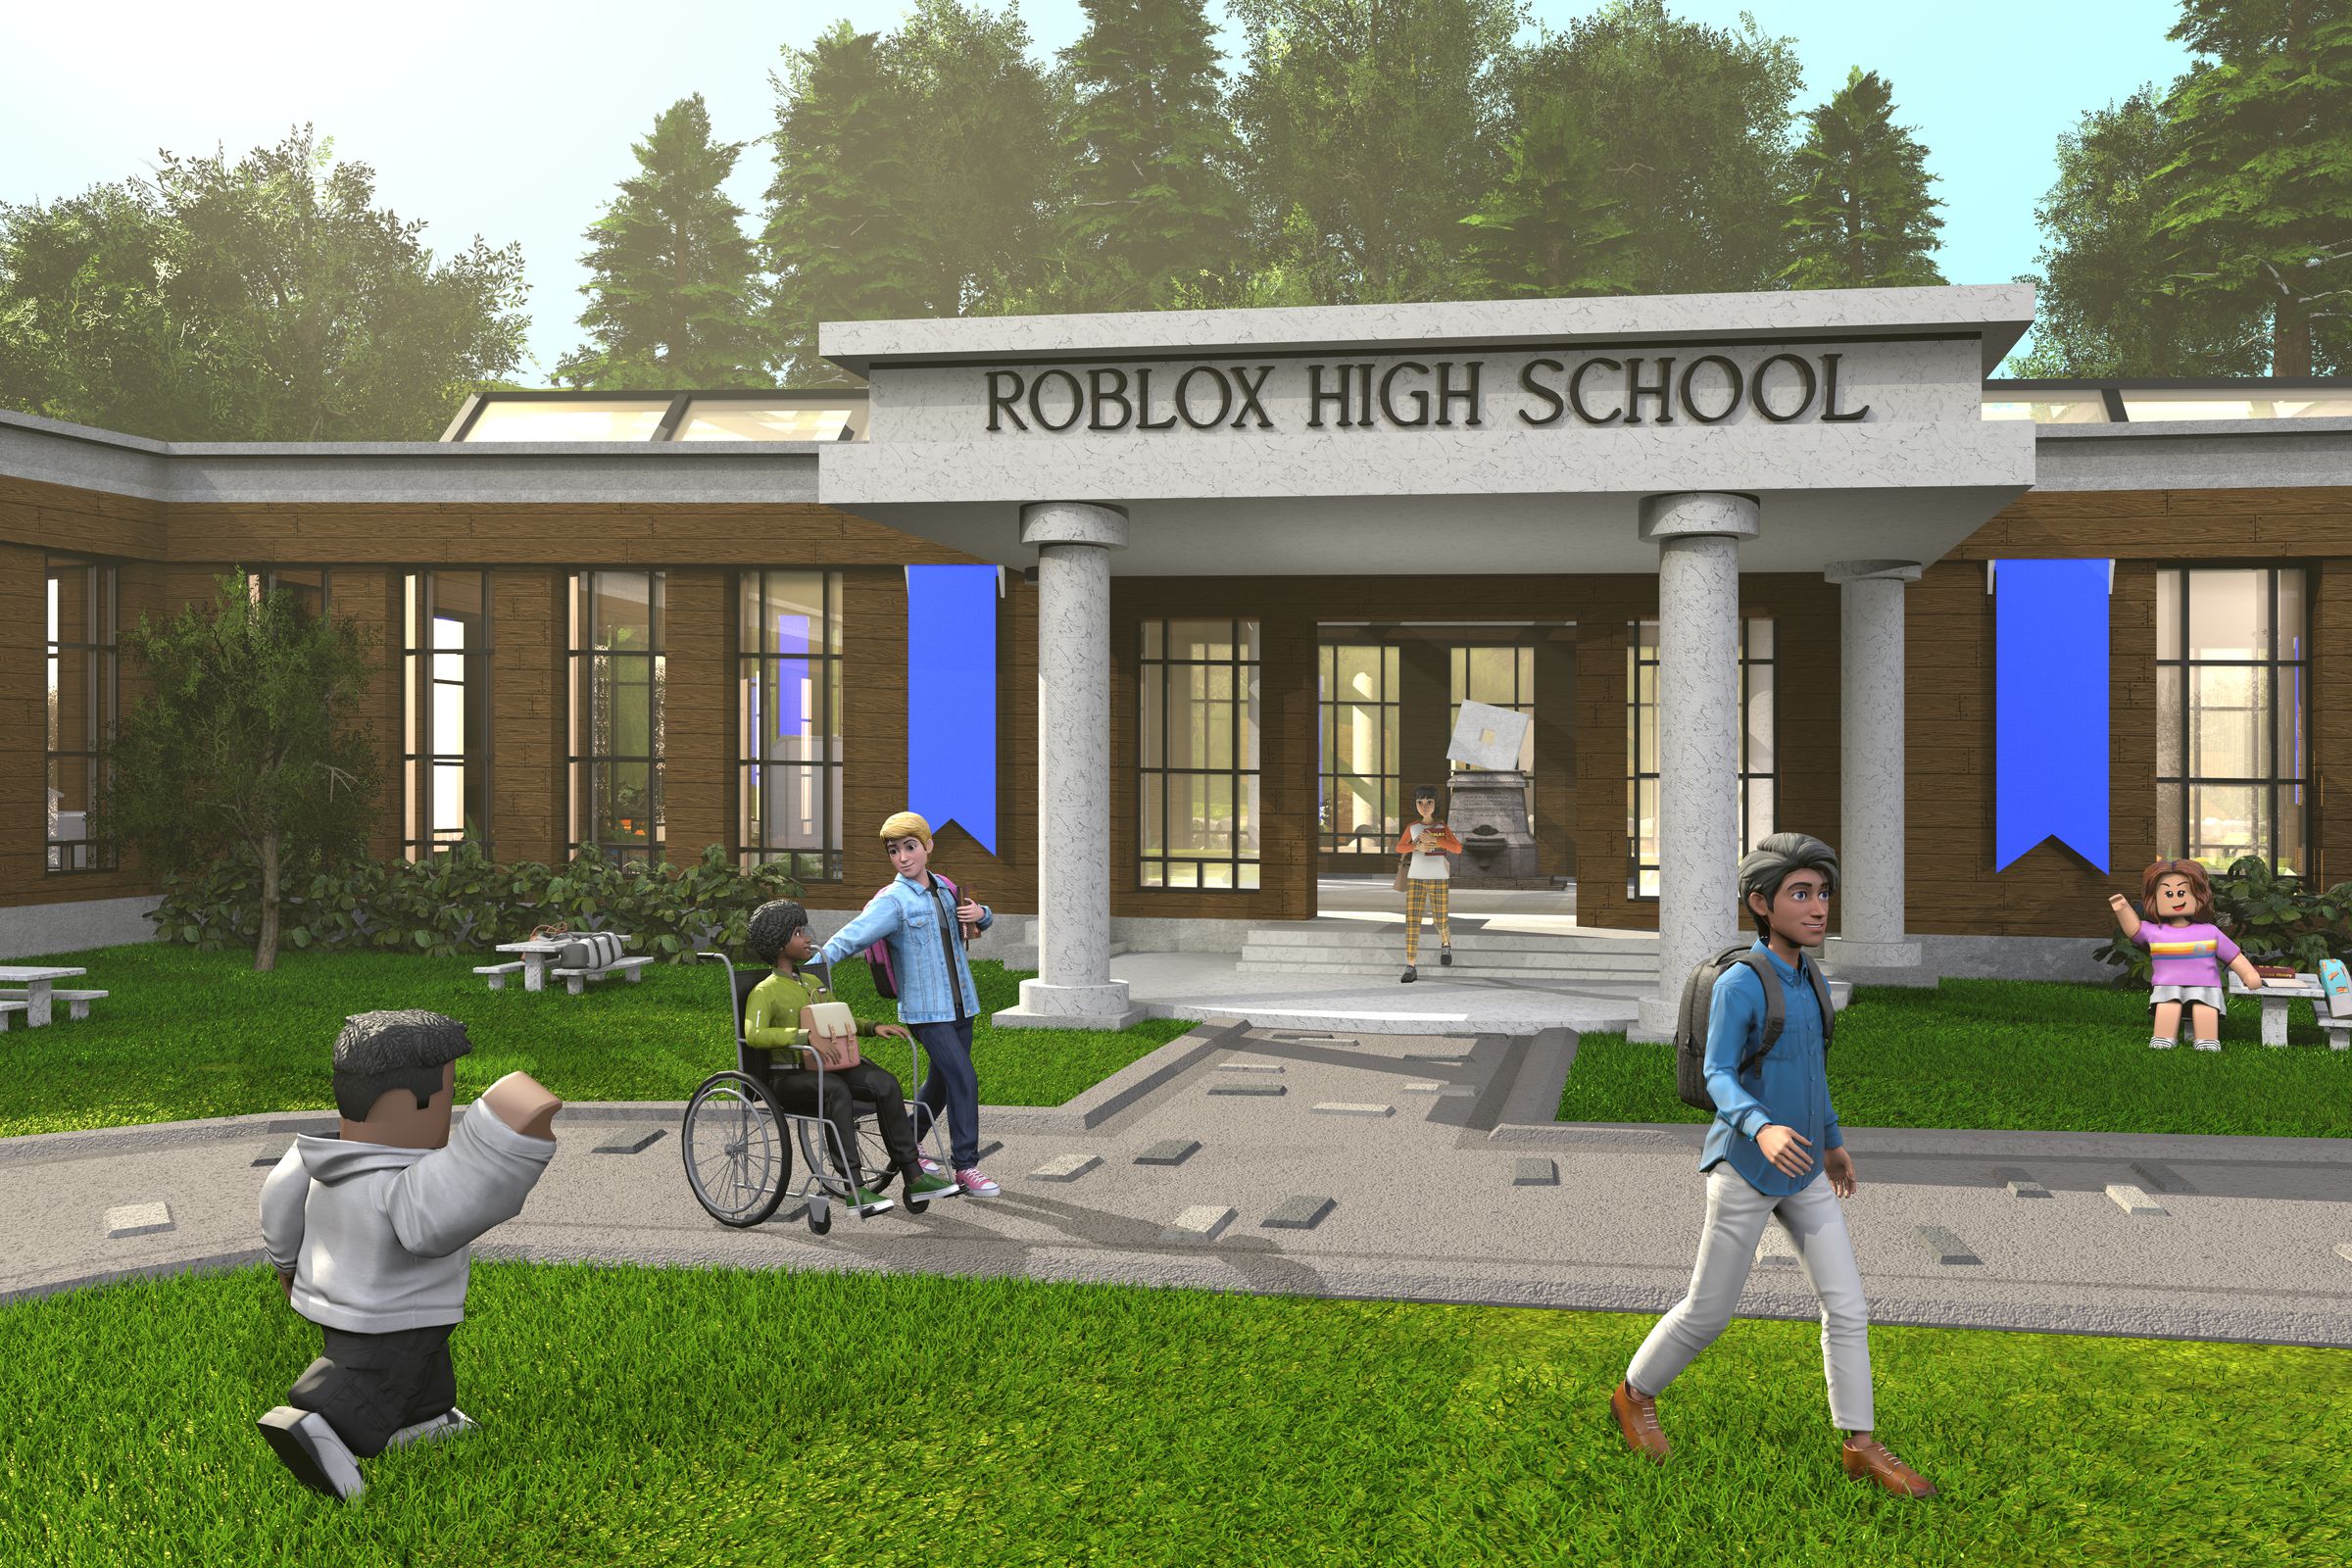 An in-game building reading Roblox High School, with students outside on the grass